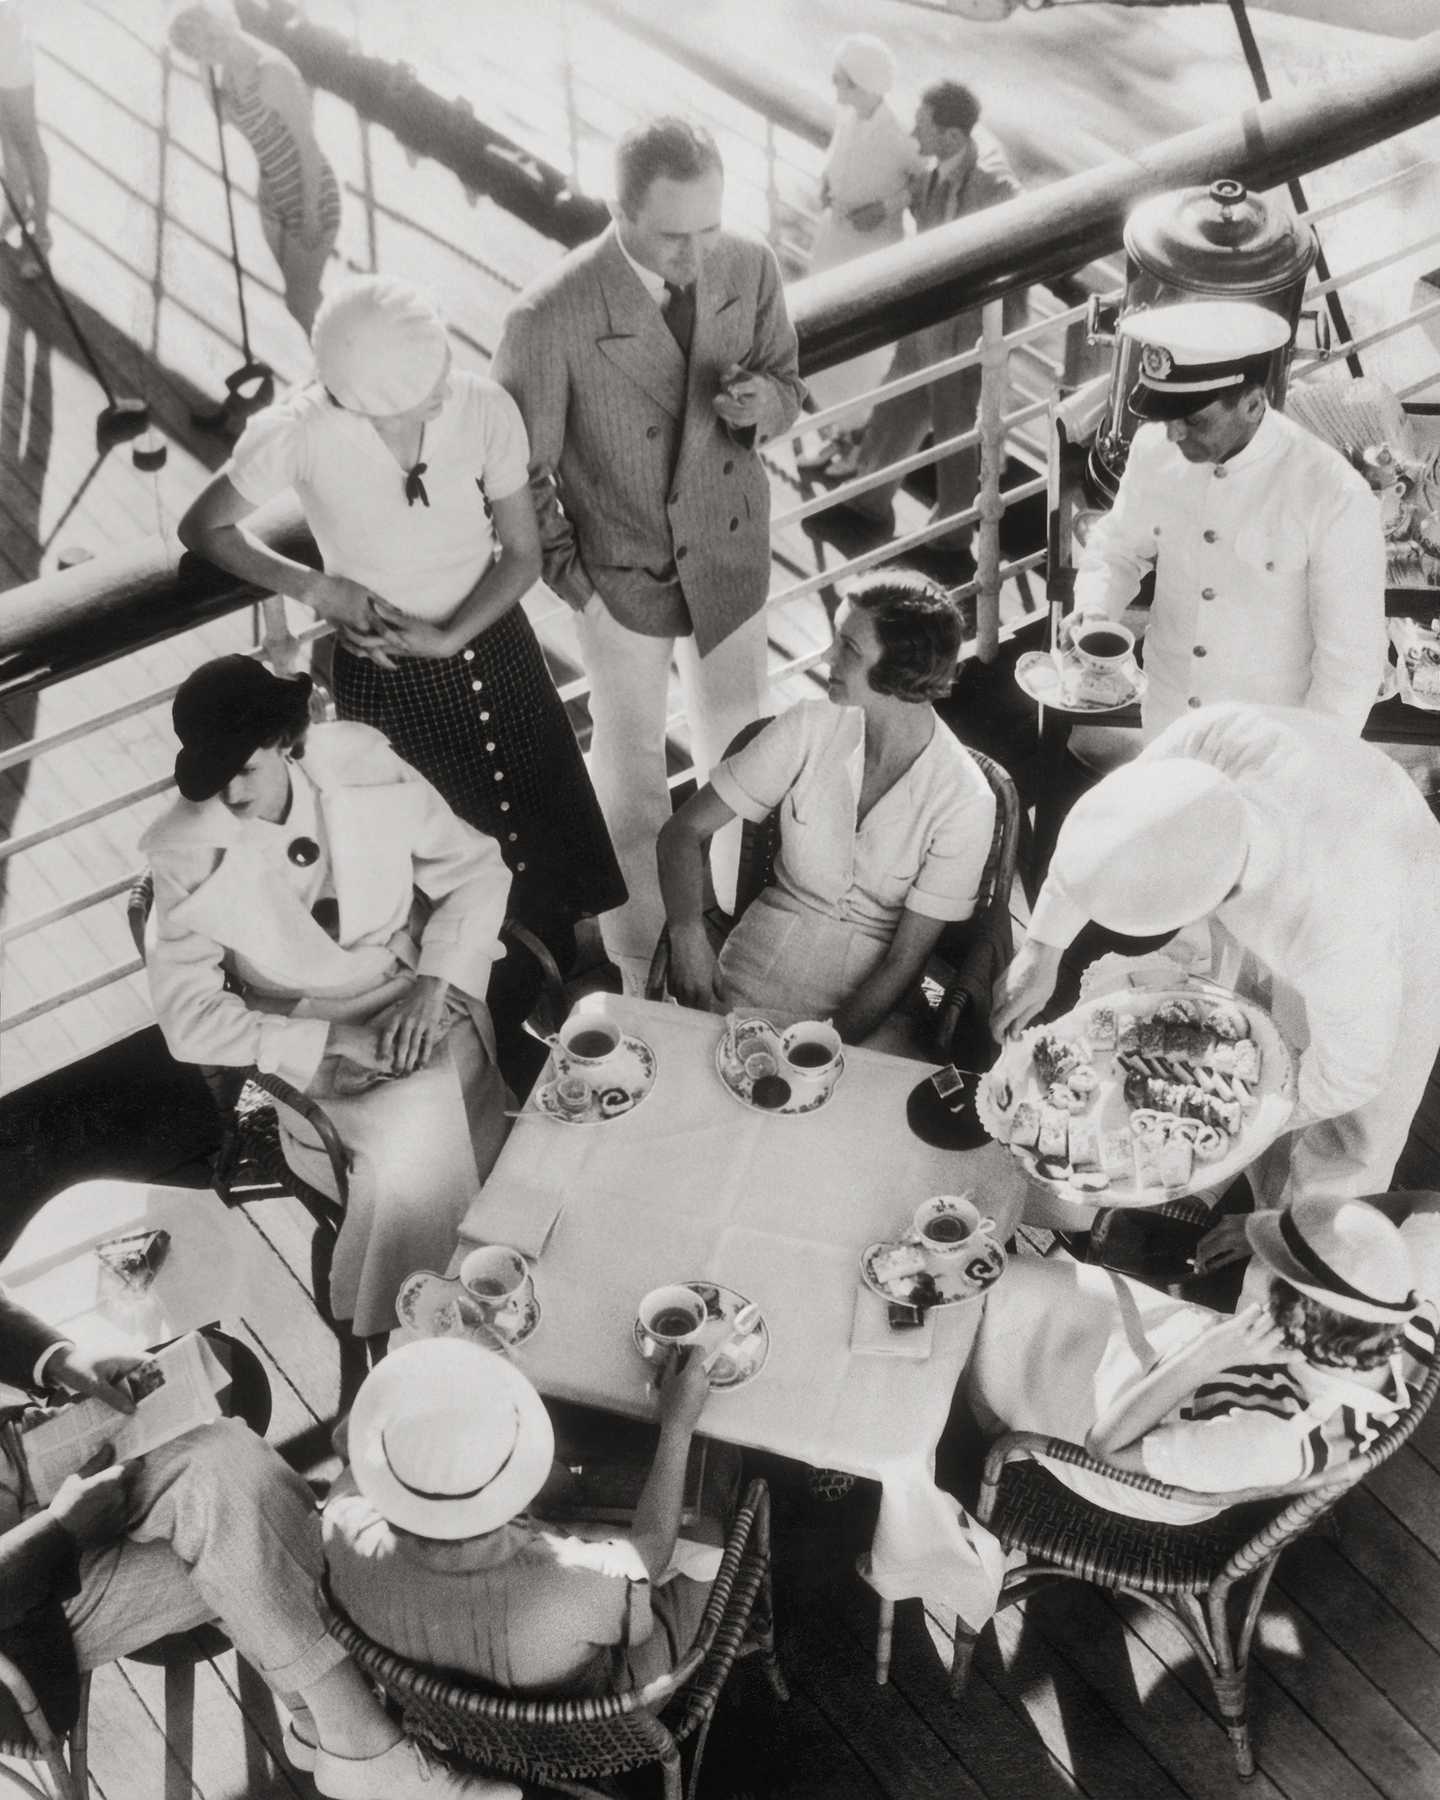 Black and white photograph of a group of people in the 1930s on the deck of a ship sitting at a table having tea. By photographer Edward Steichen.